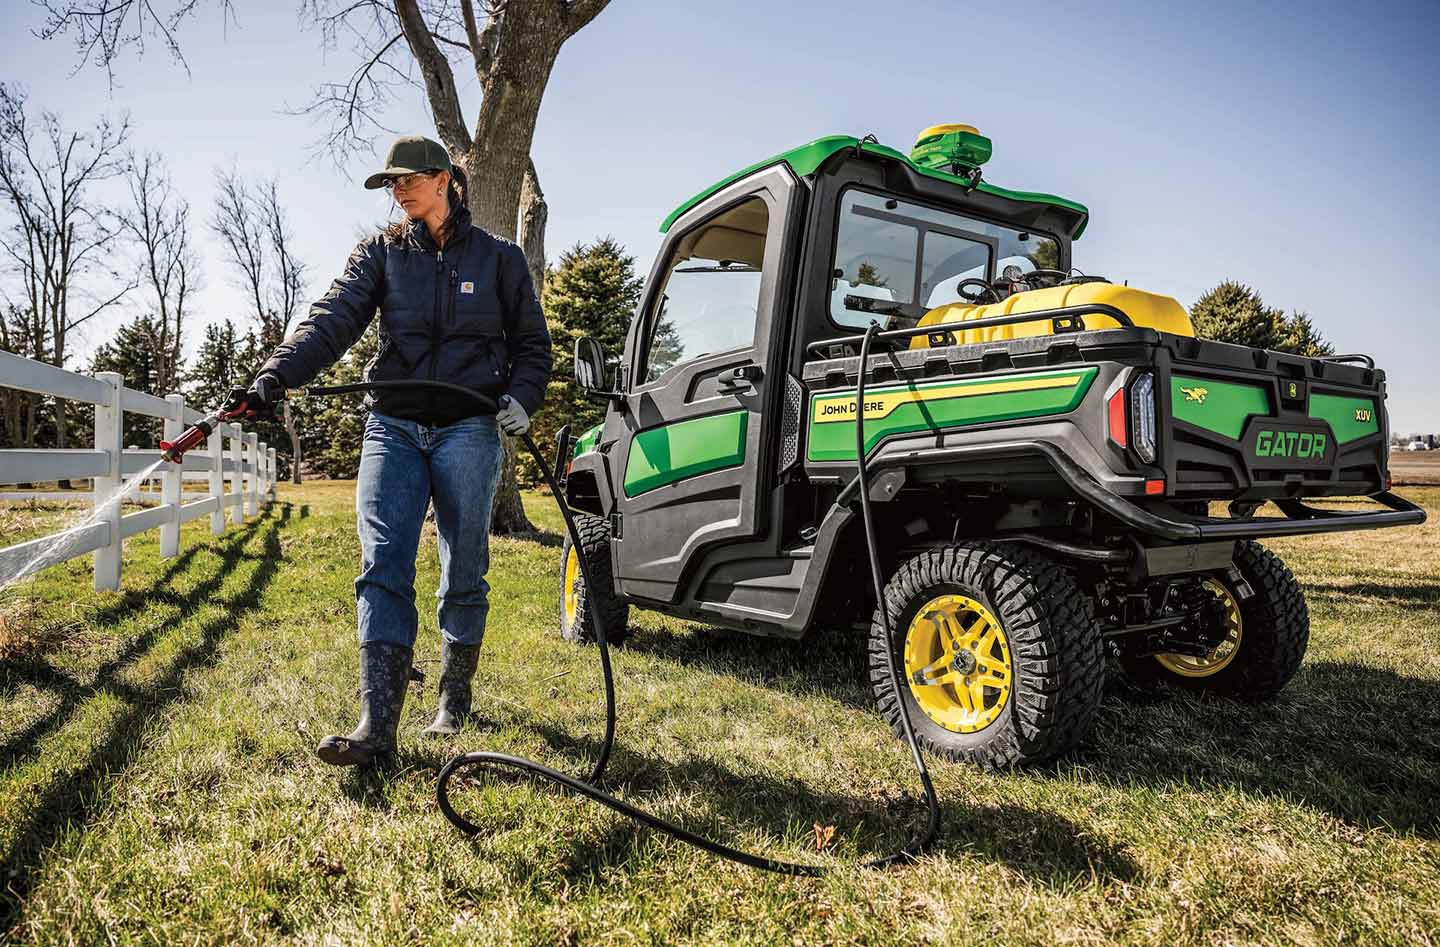 The John Deere Gator 845 and 875 blend luxury and capability in a big, green package.